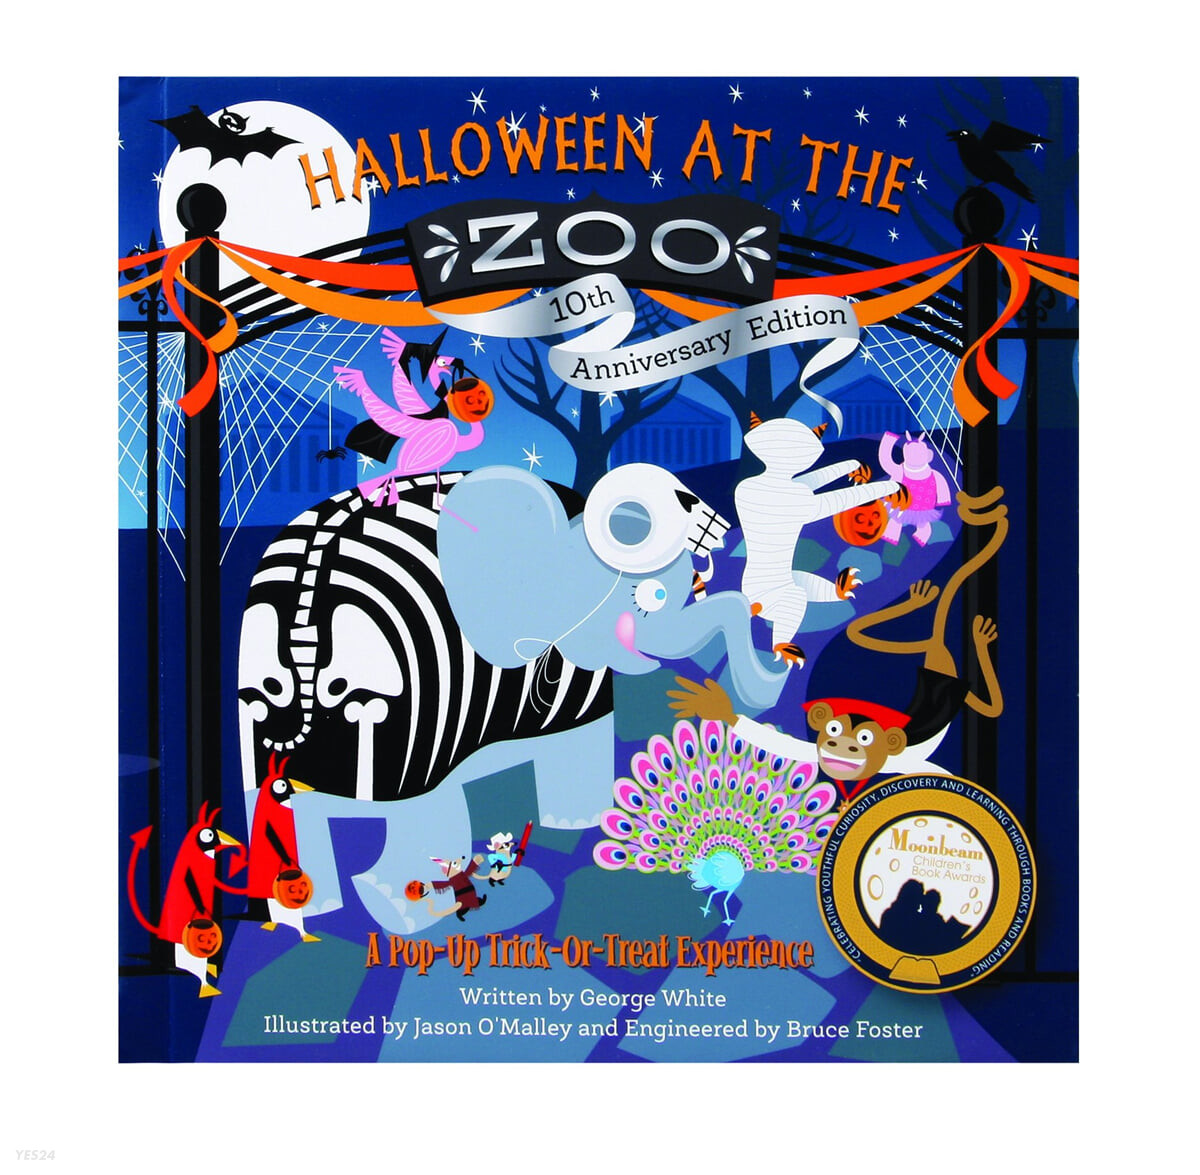 Halloween at the zoo: a pop-up trick-or-treat experience